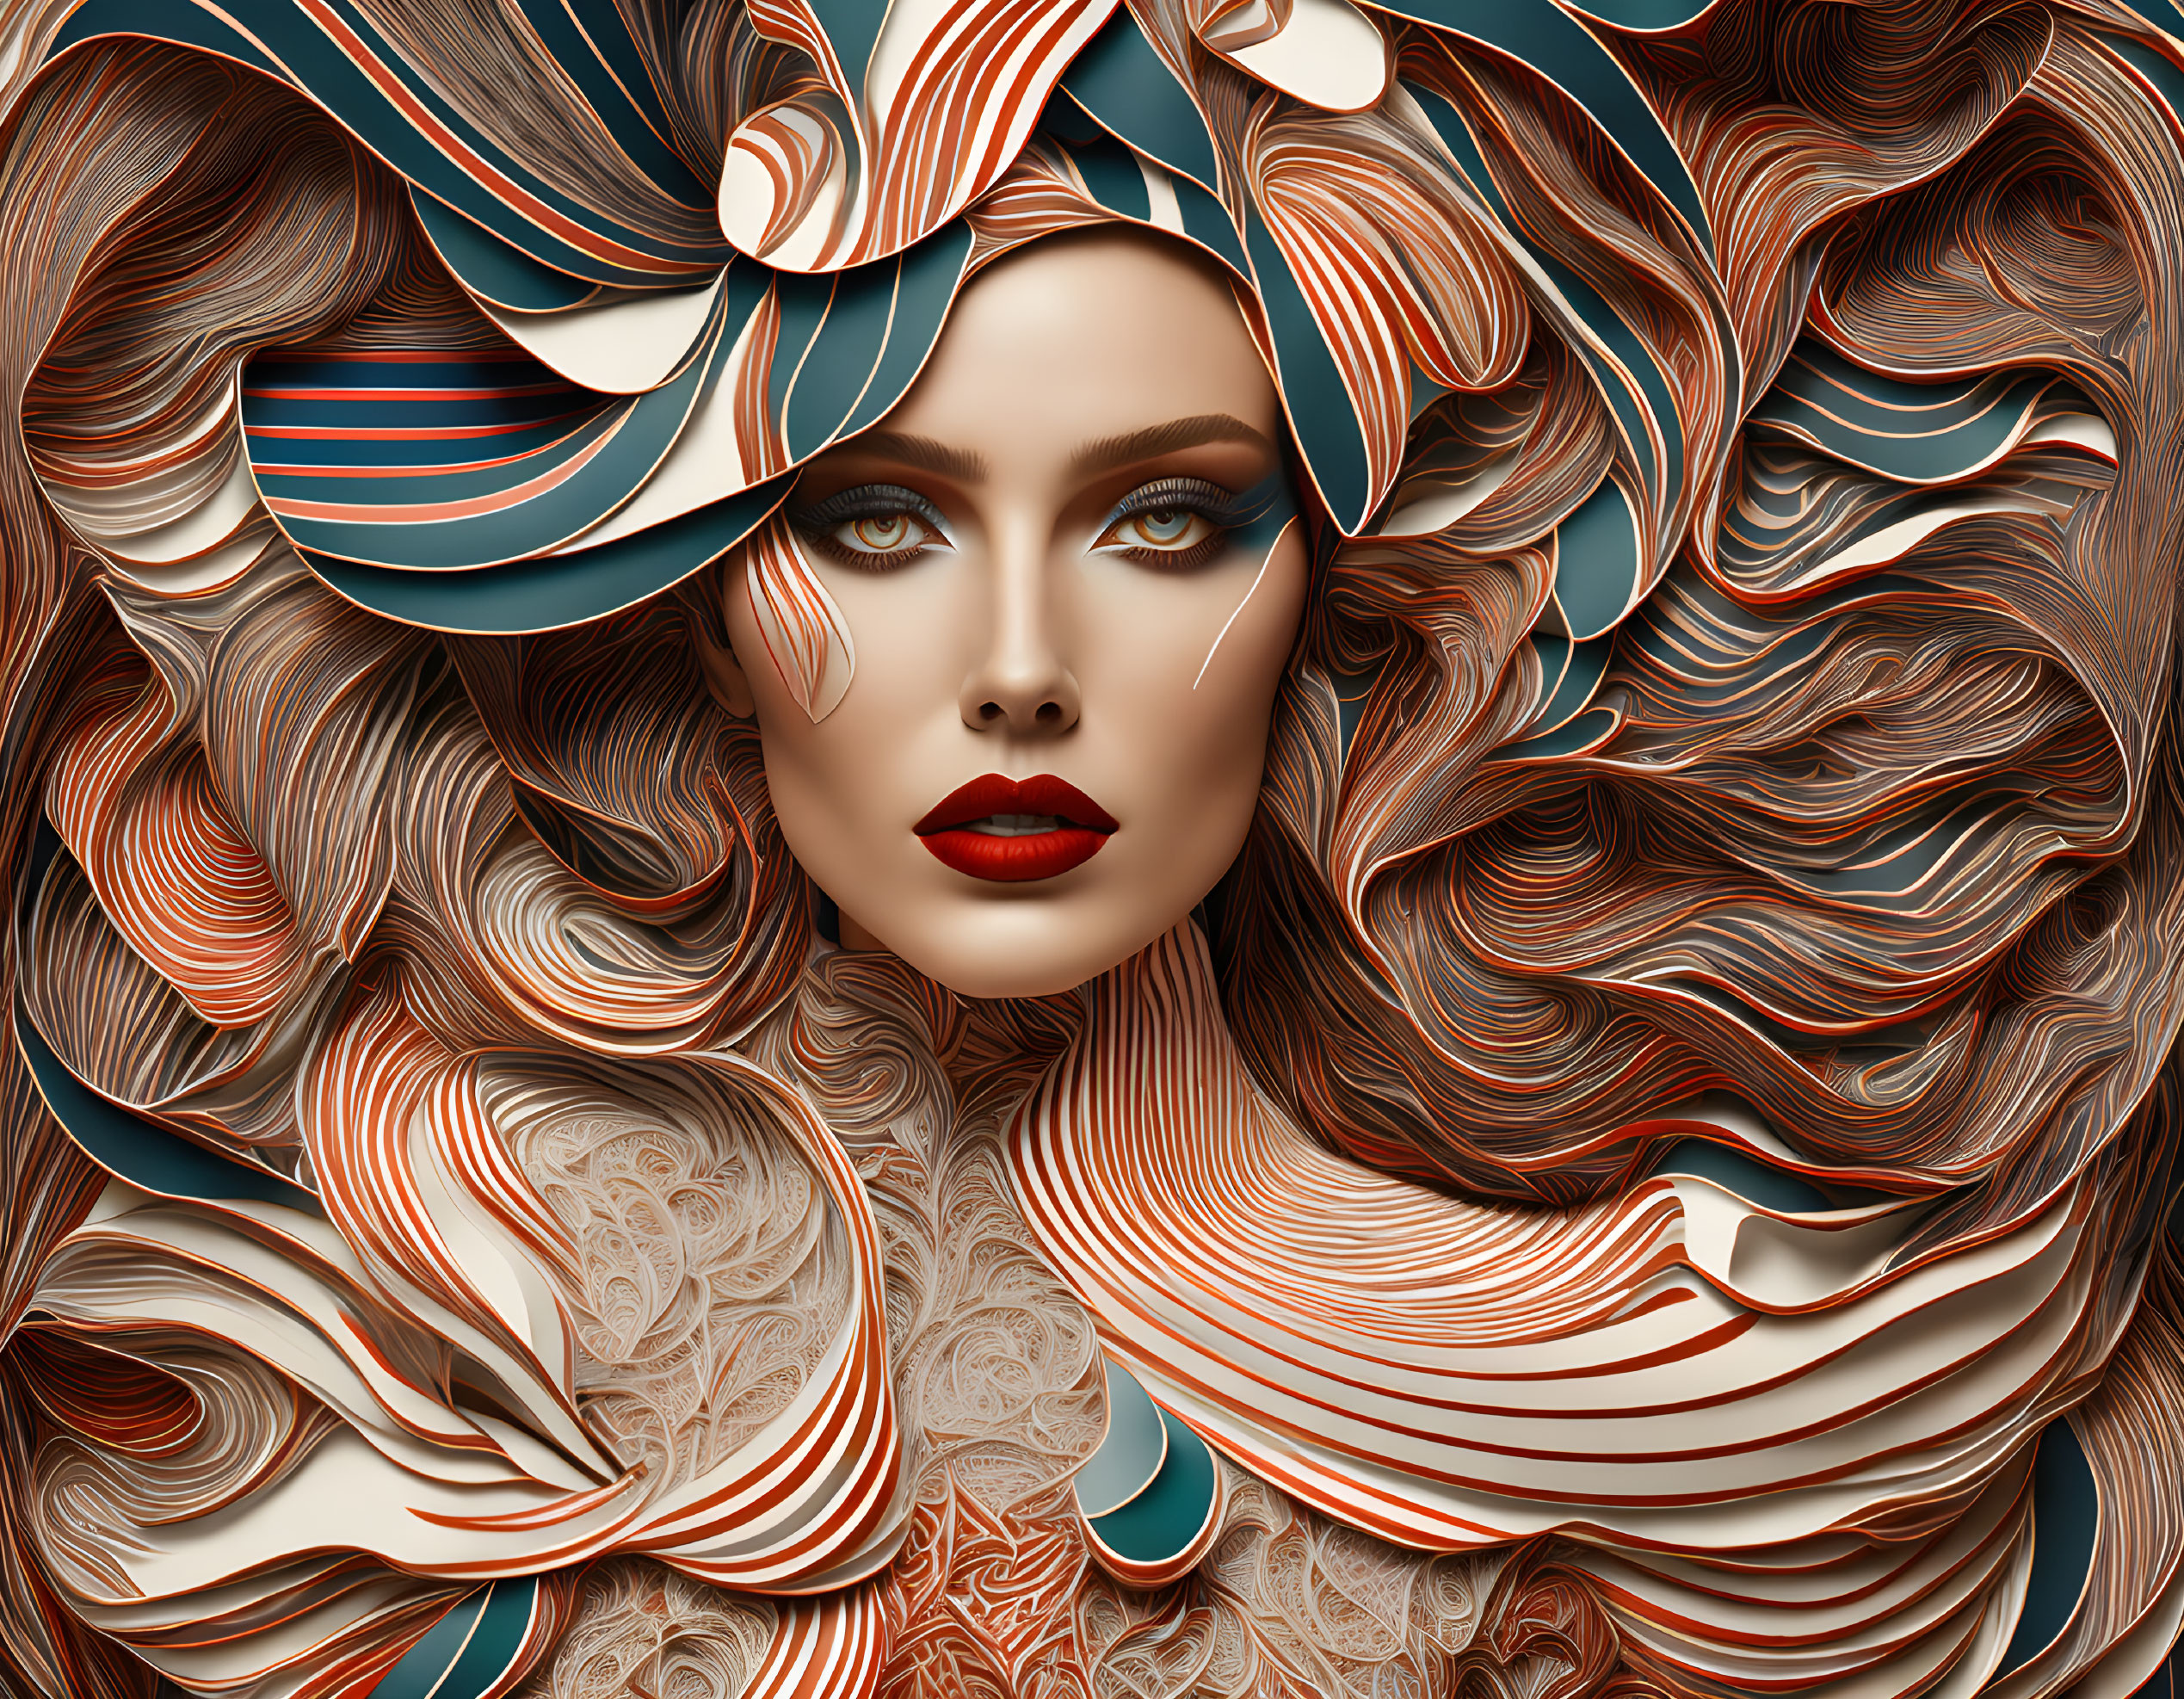 Abstract Woman Portrait with Flowing Hair and Ribbon-like Shapes in Brown, Cream, and Red Palette